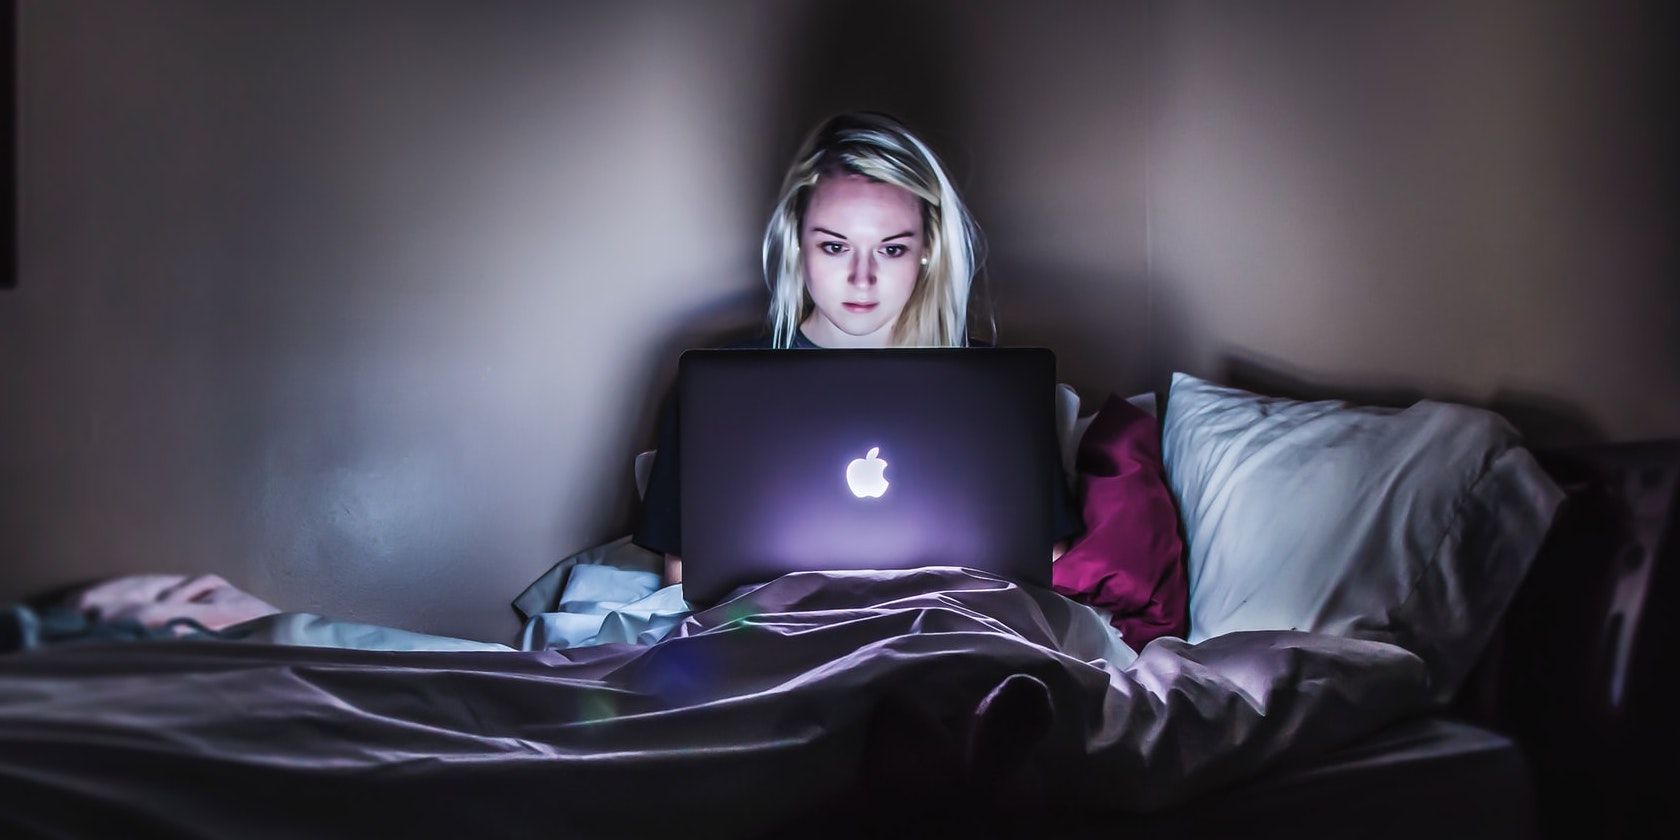 Girl Working on Computer in Bed